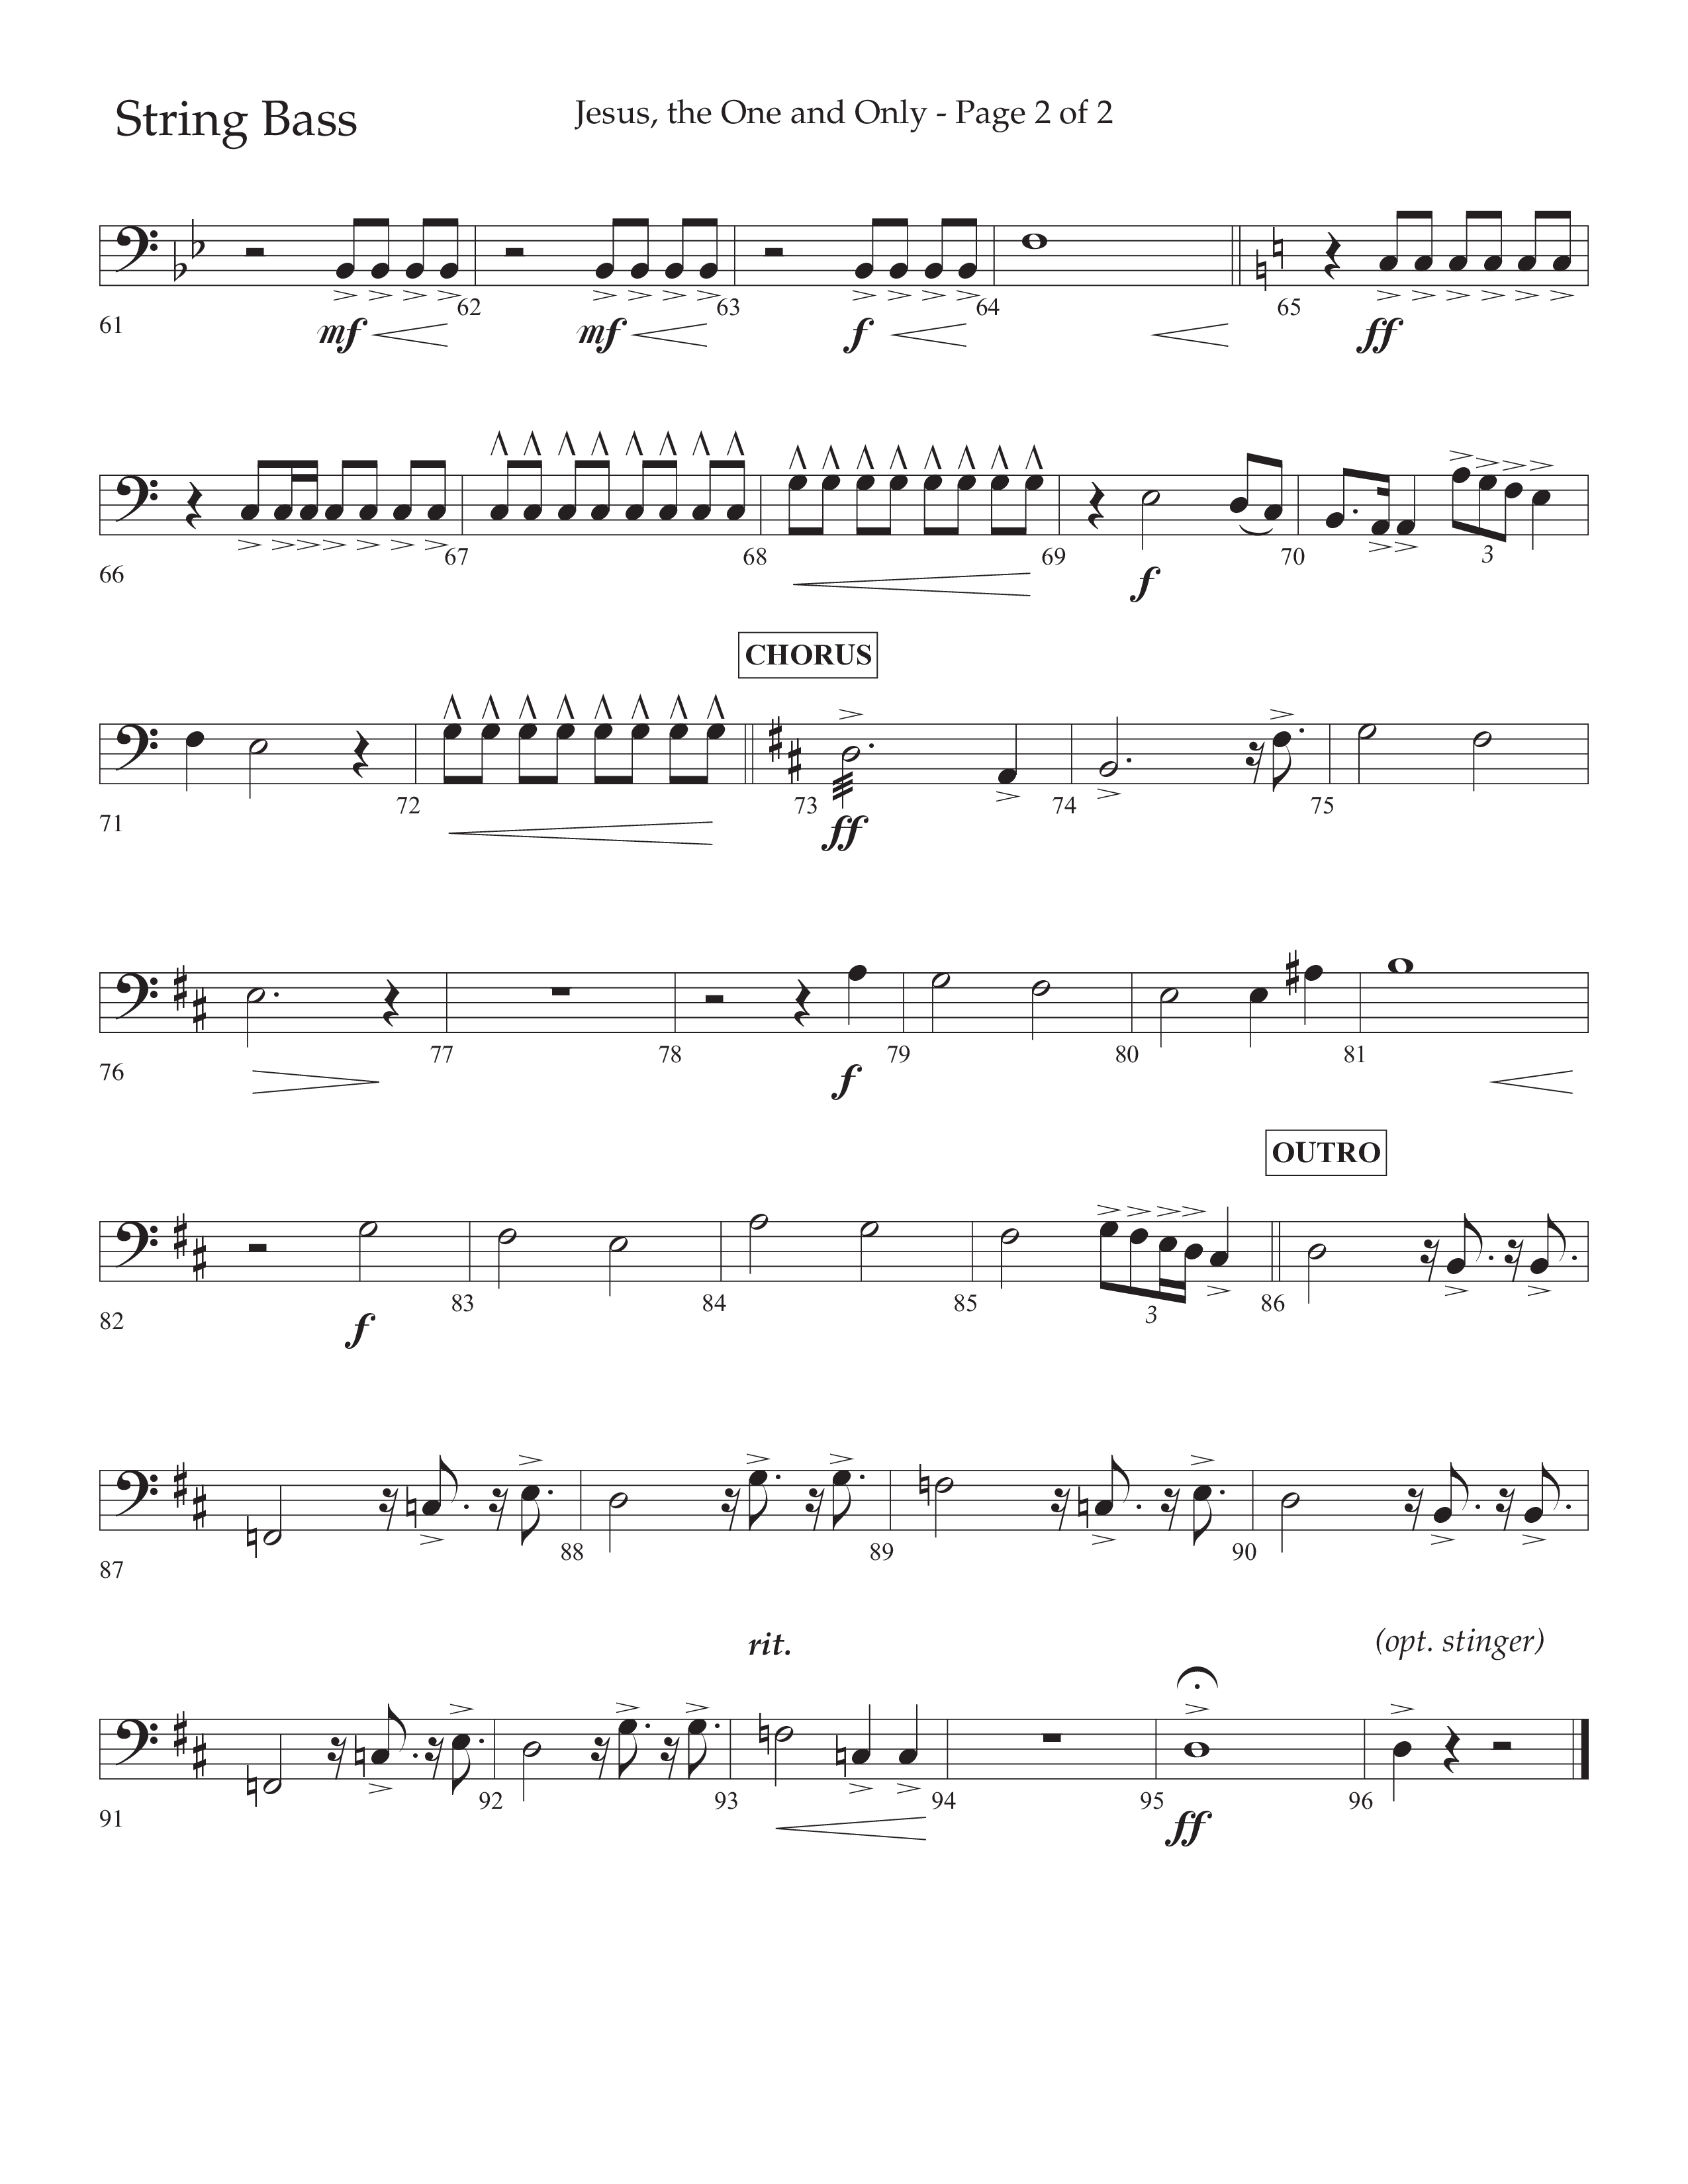 Jesus The One And Only (Choral Anthem SATB) String Bass (Lifeway Choral / Arr. John Bolin / Arr. Don Koch / Orch. David Shipps)